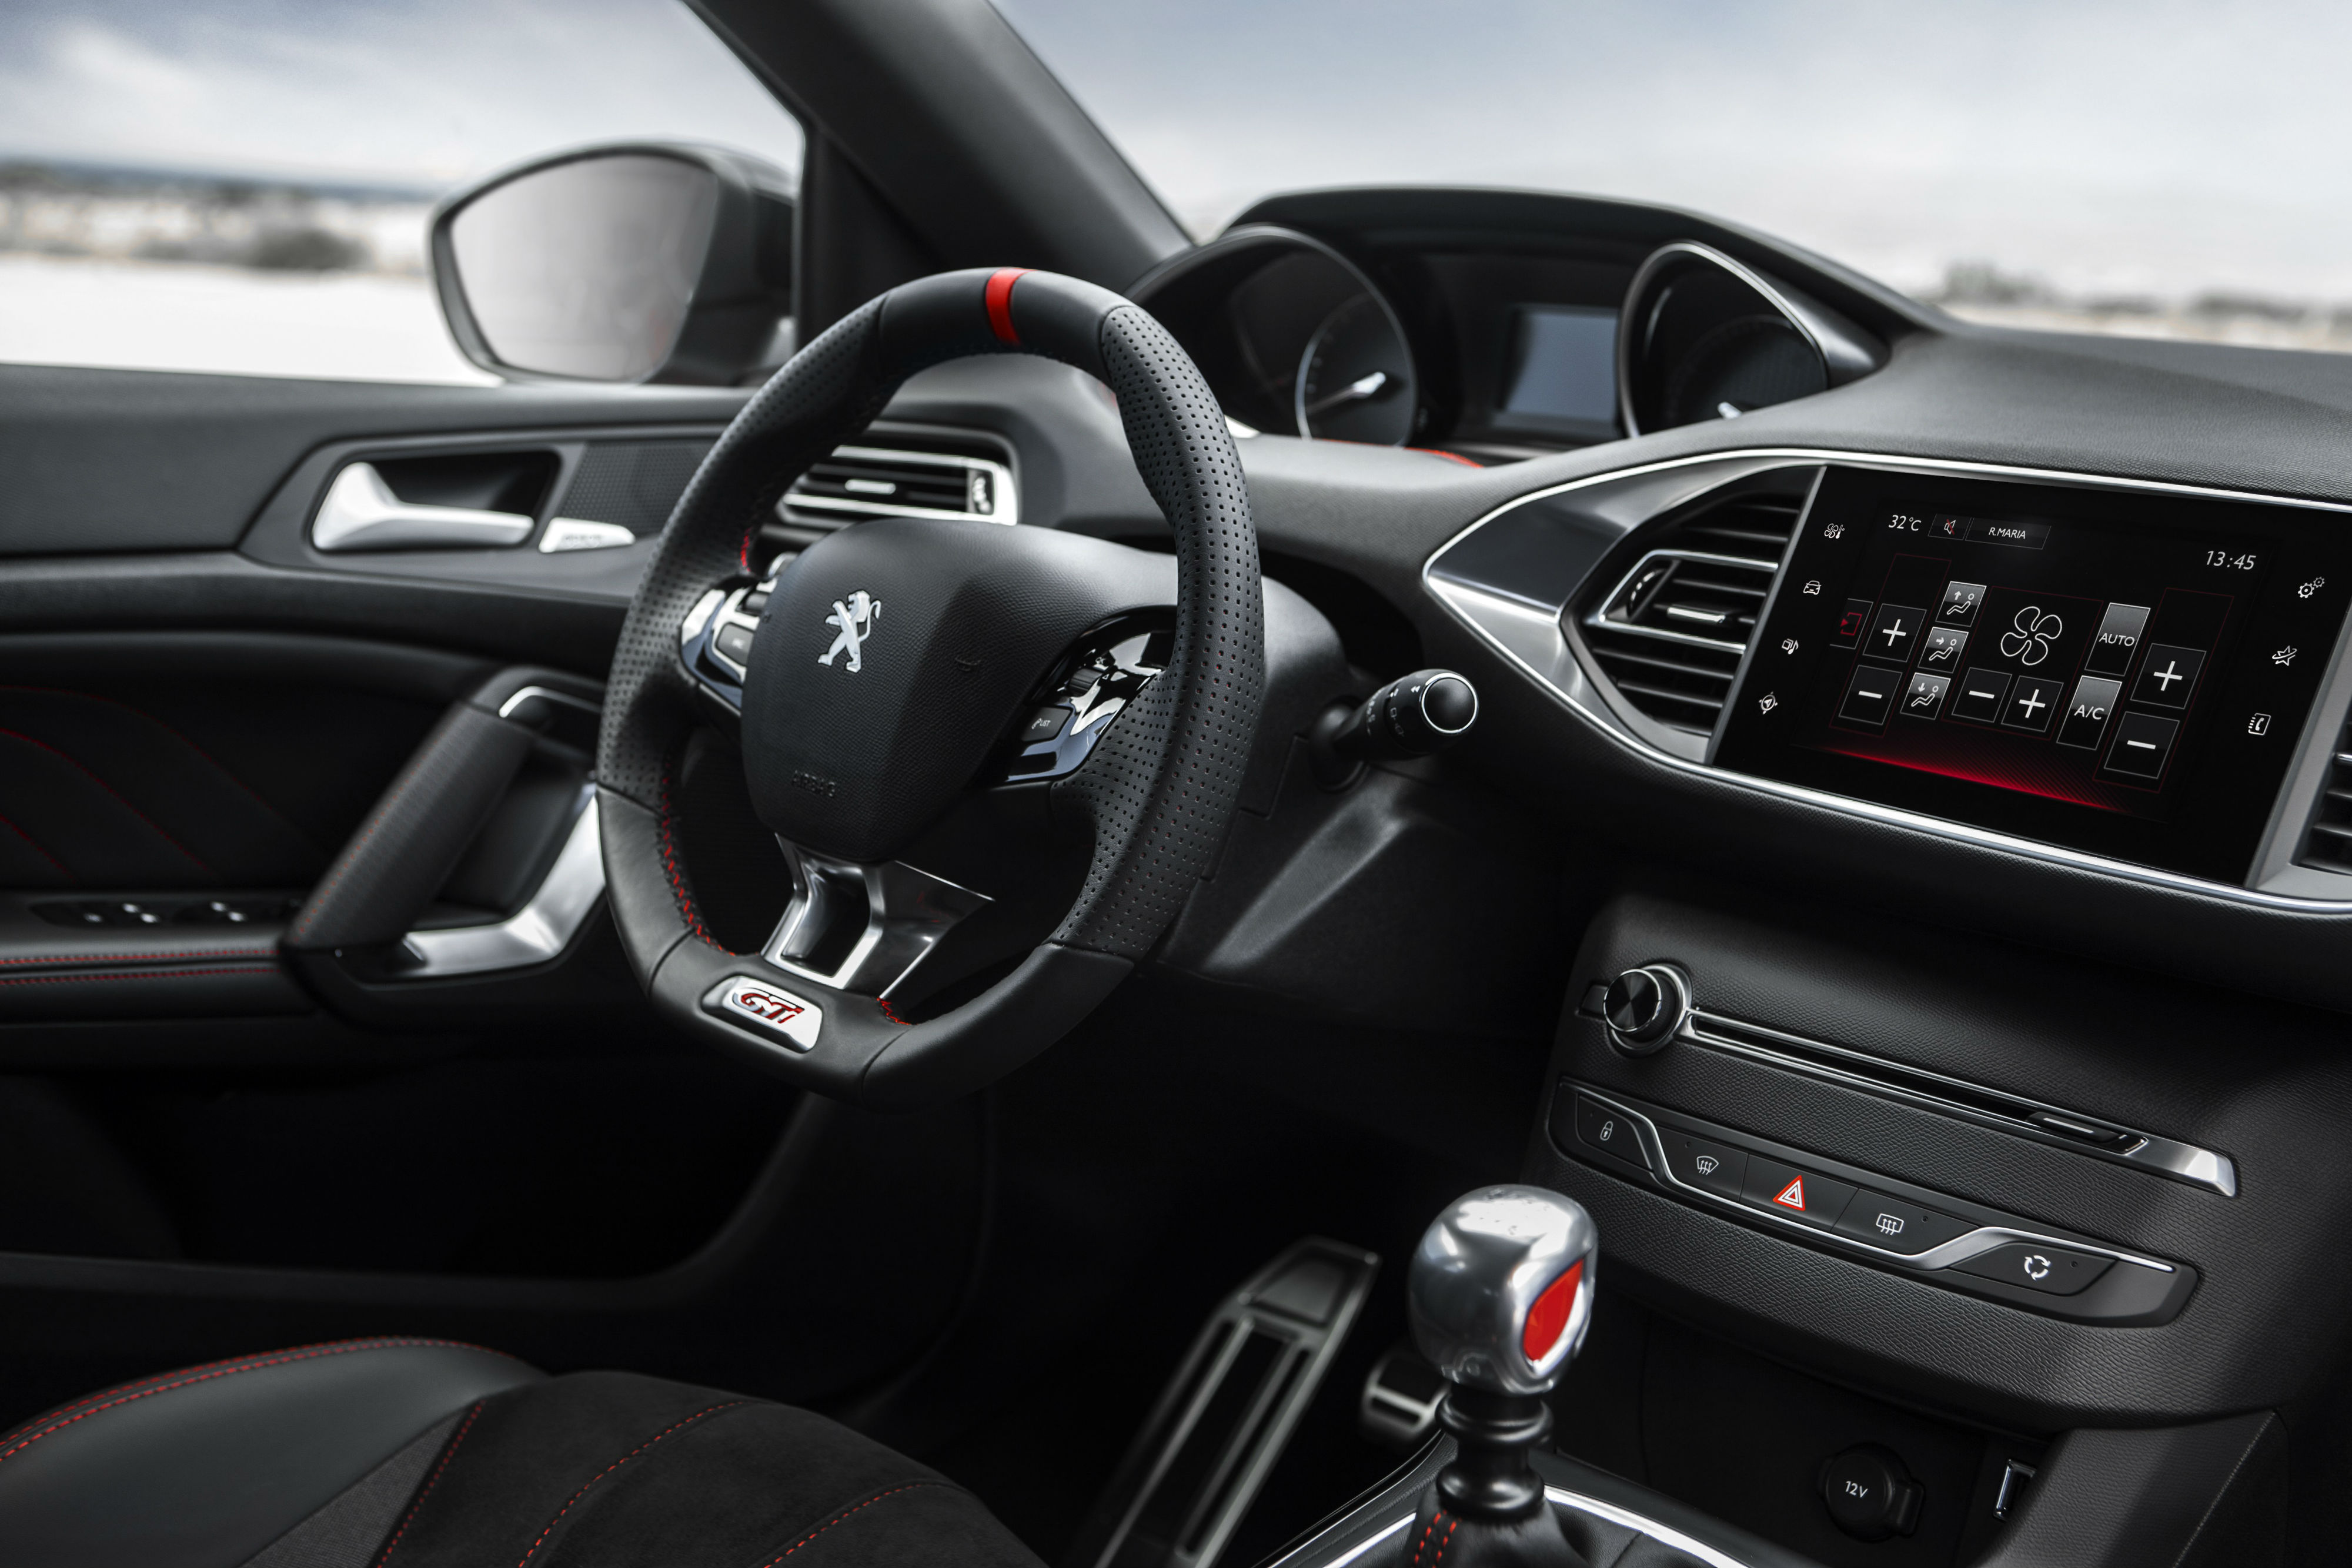 Review of the 2015 Peugeot 308 GTI 270